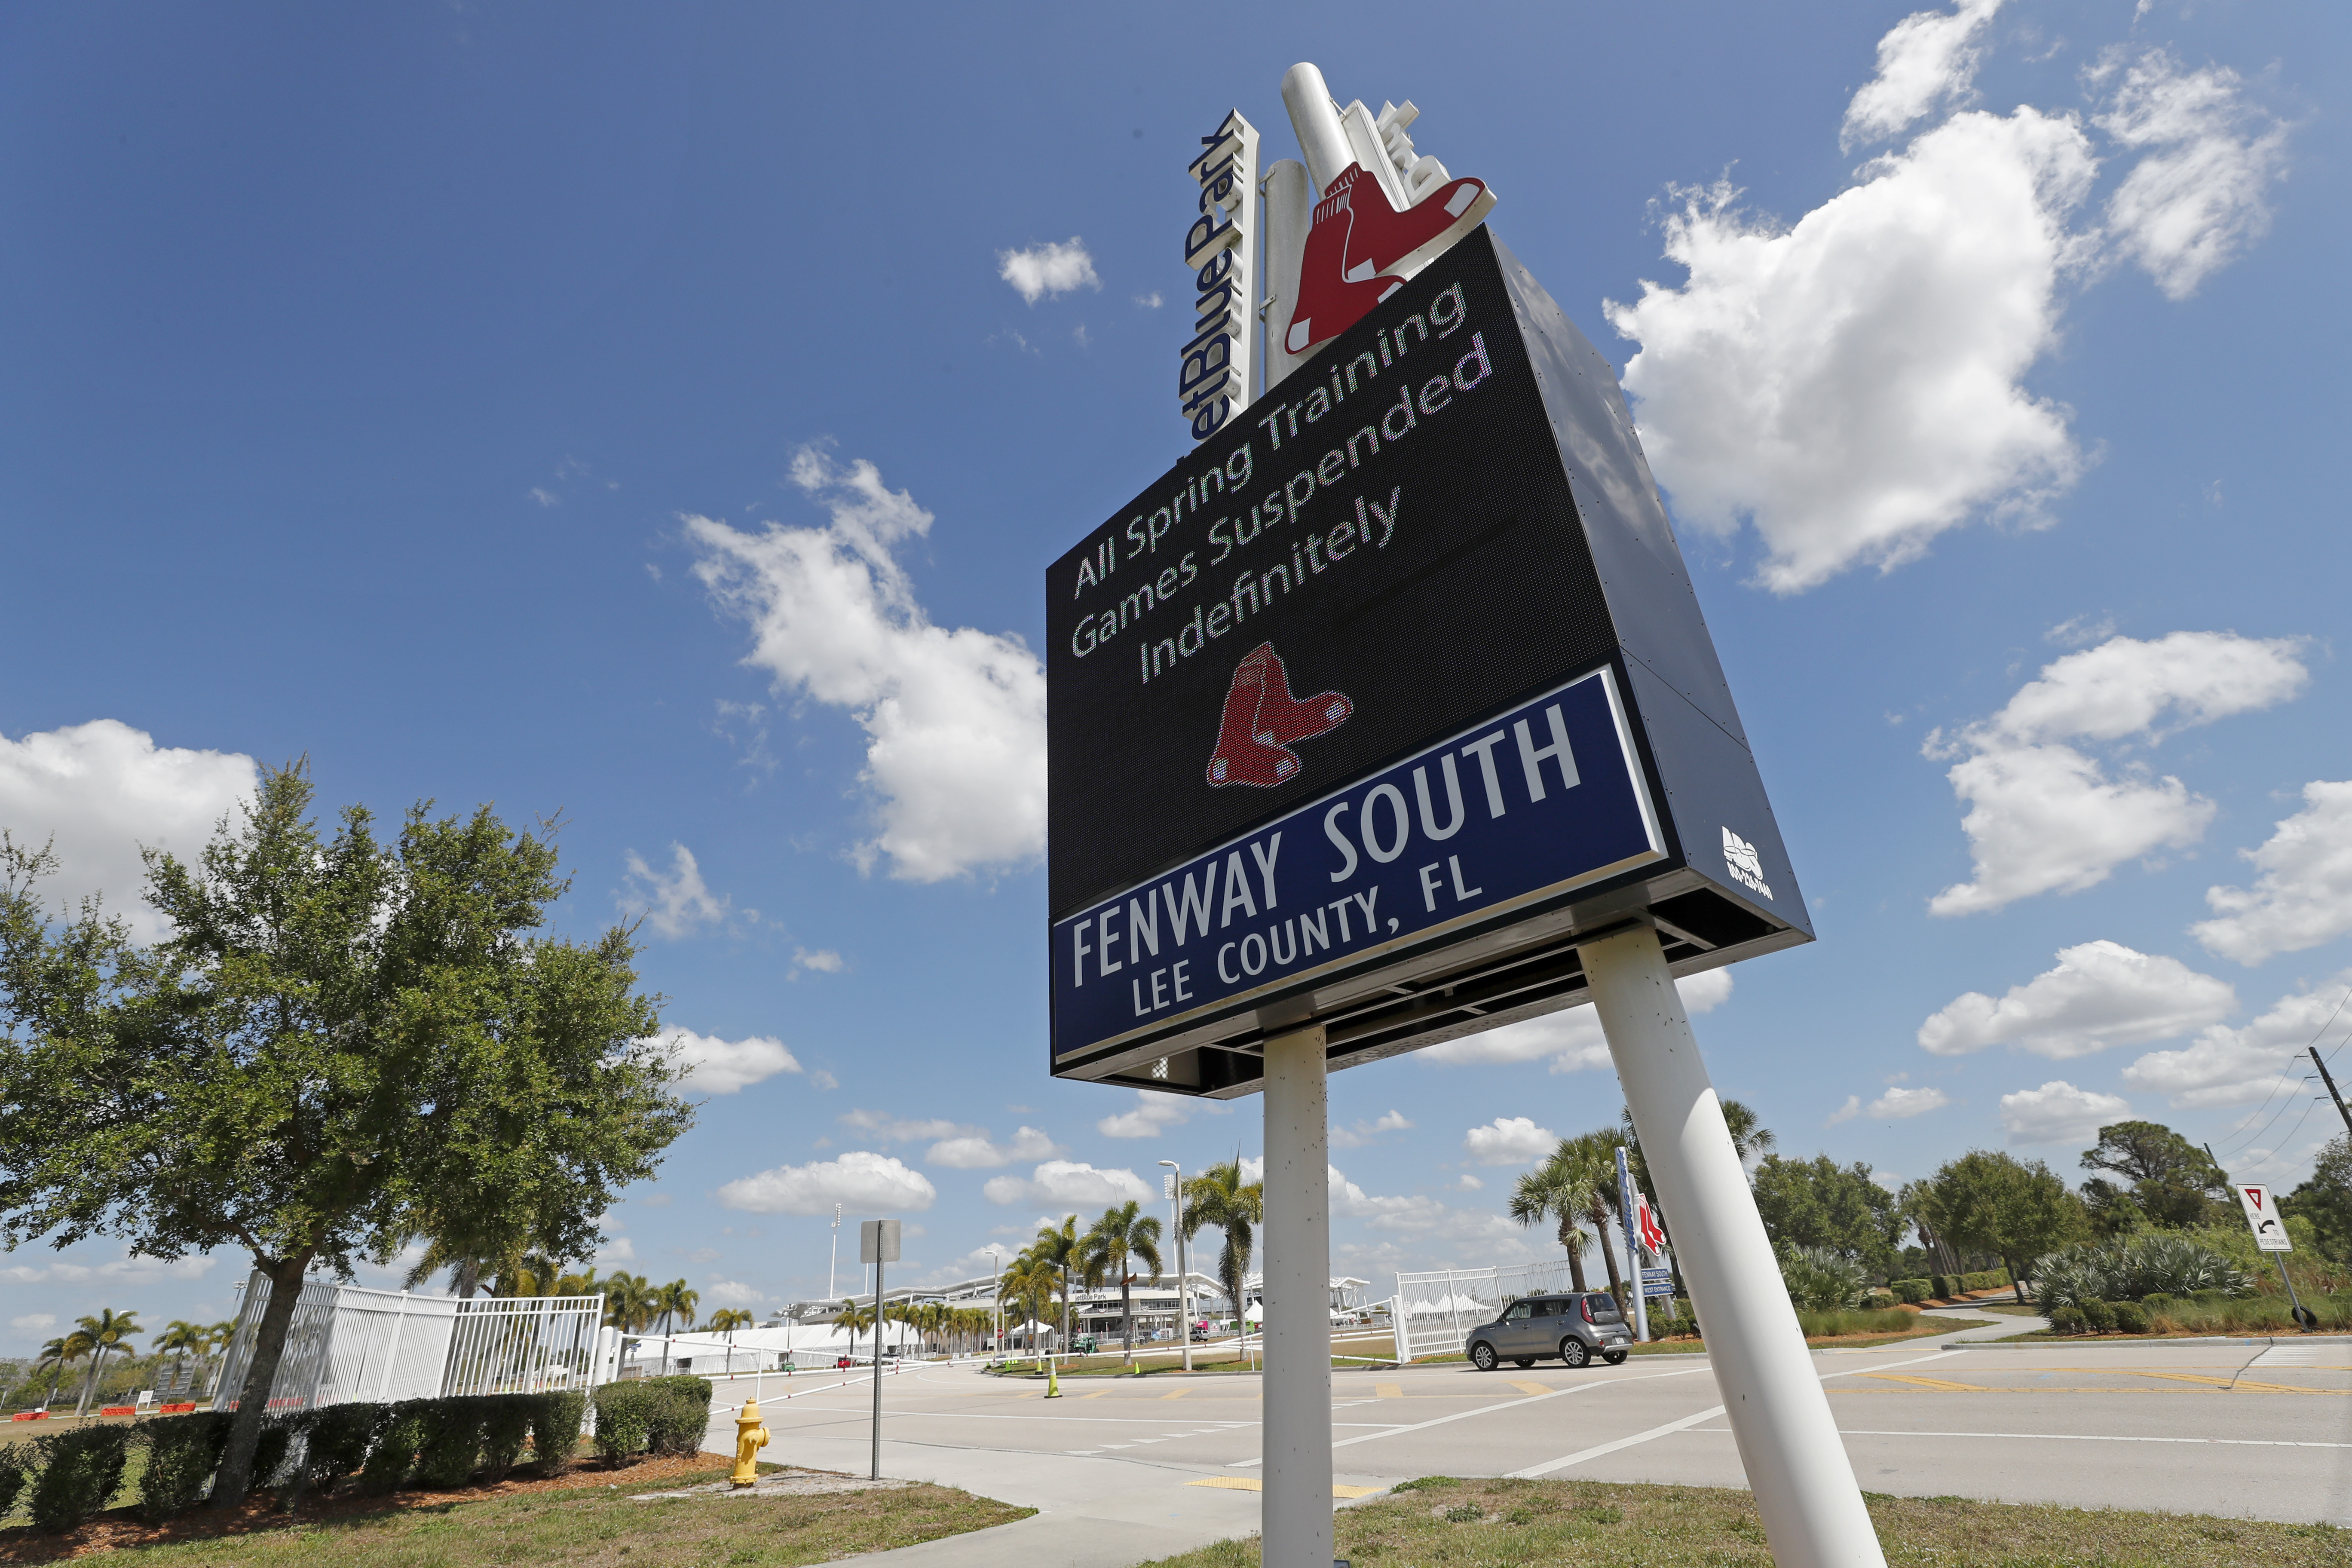 For many Red Sox fans, the trip to Fort Myers is a rite of spring